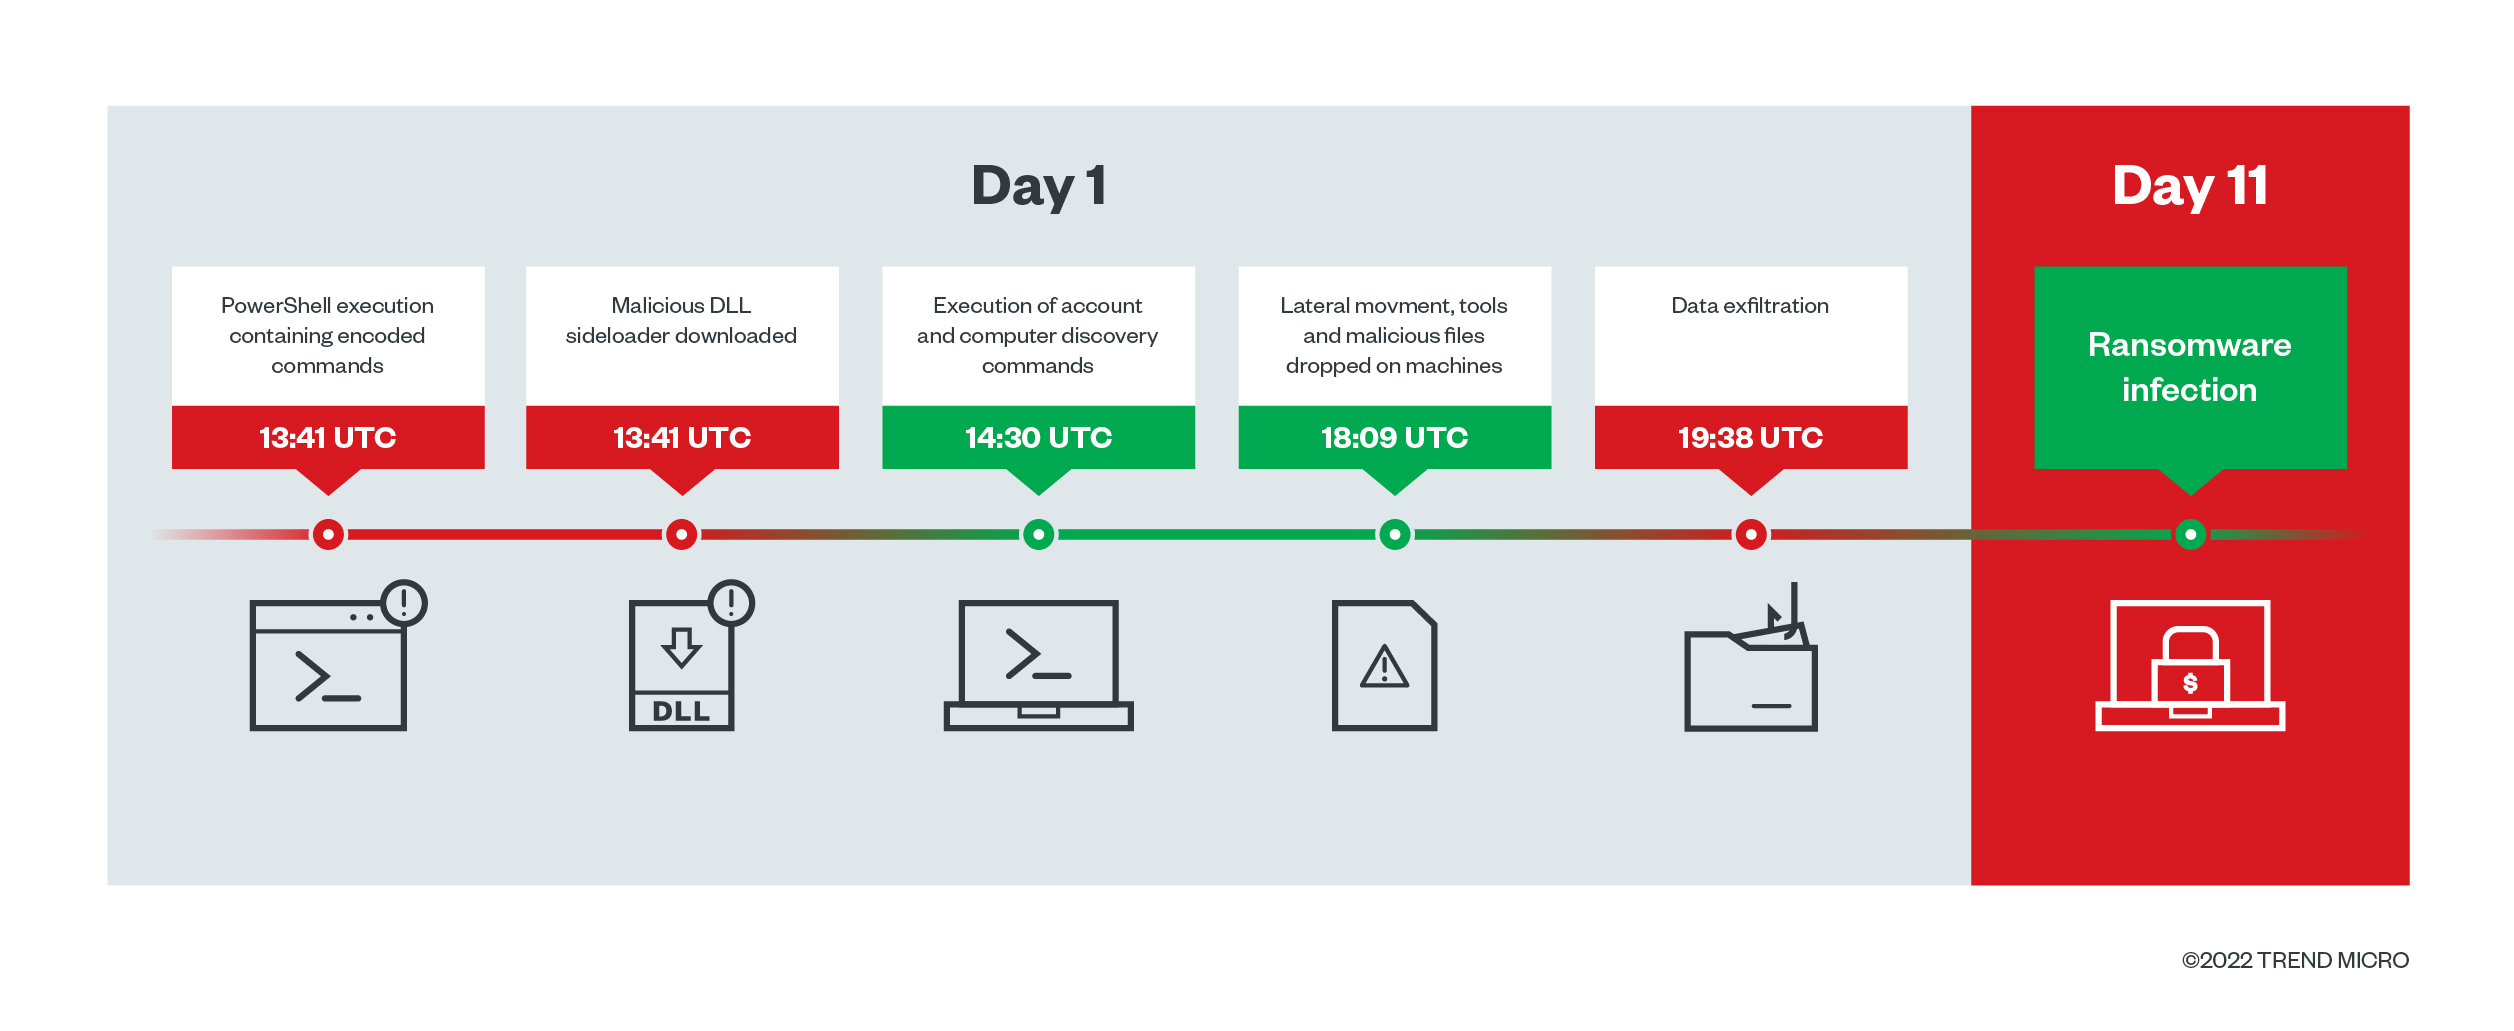 Figure 14. Timeline of data exfiltration and ransomware infection based on investigated cases